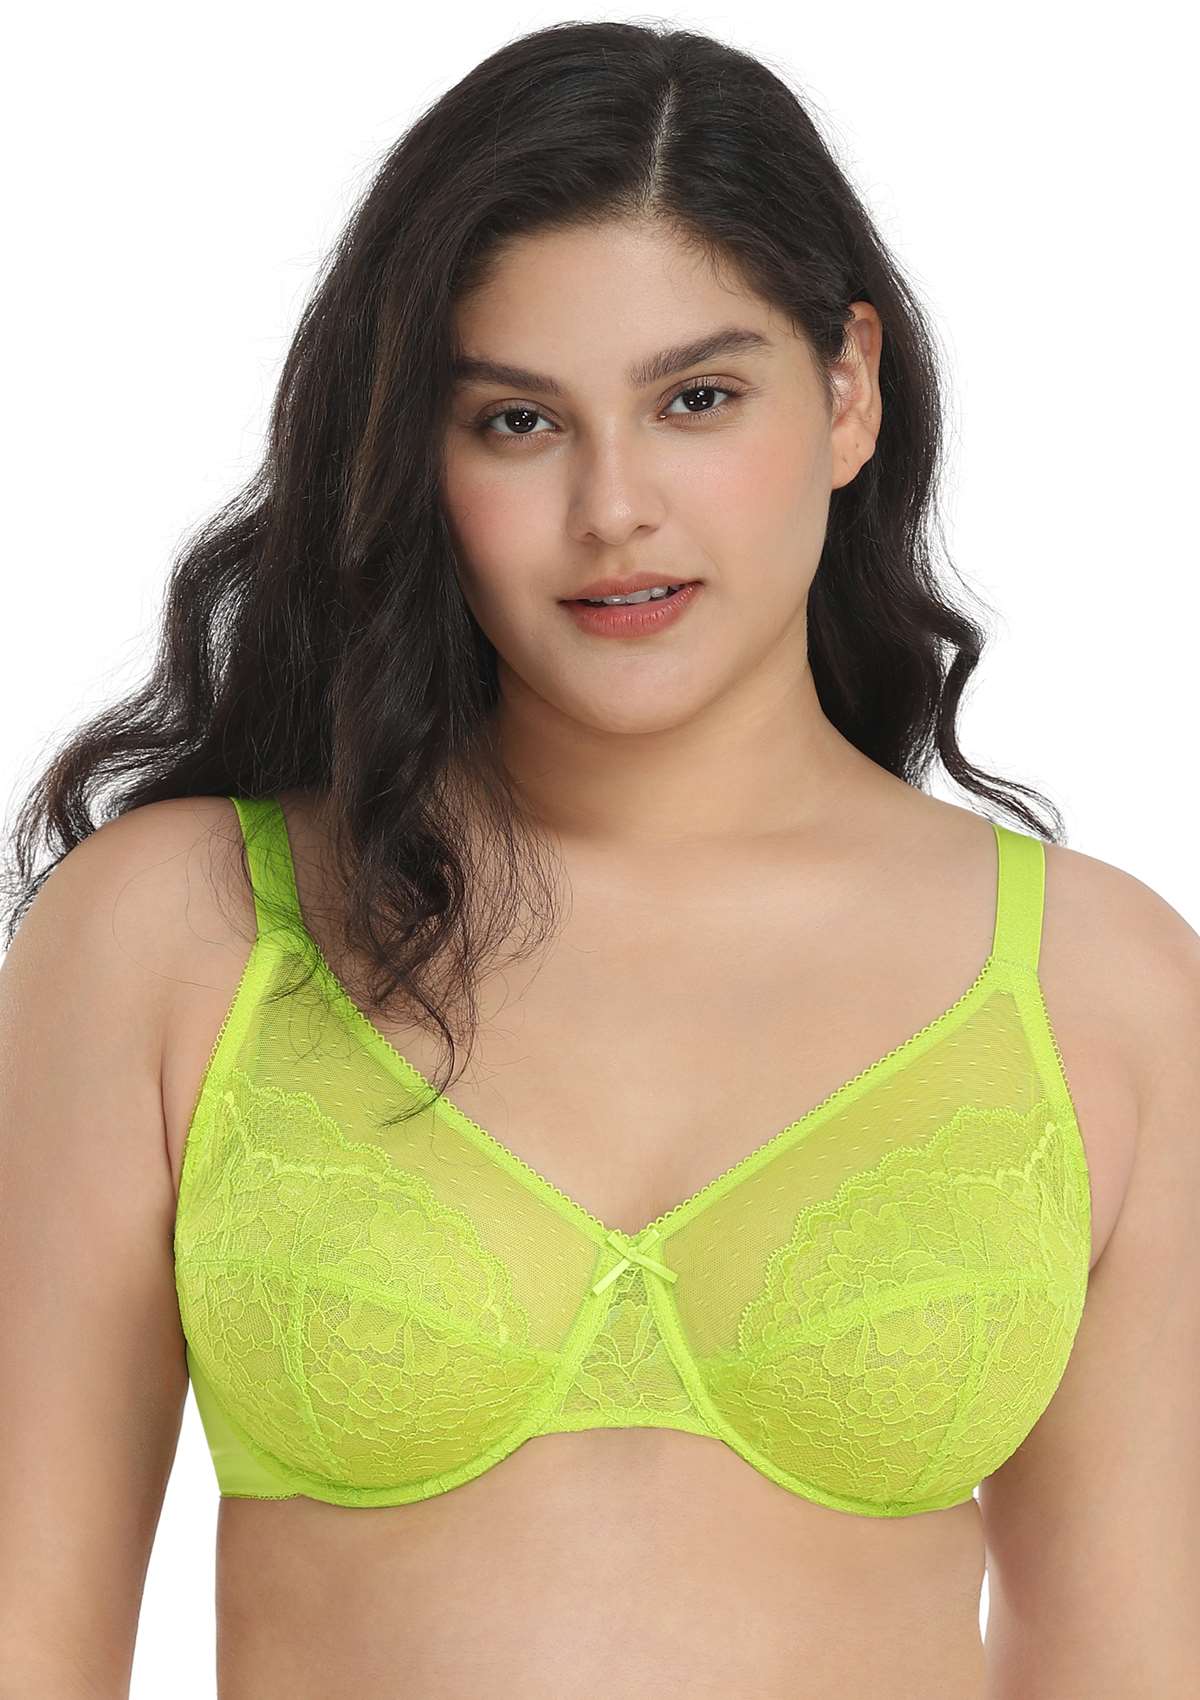 HSIA Enchante Full Cup Minimizing Bra: Supportive Unlined Lace Bra - Lime Green / 42 / DDD/F